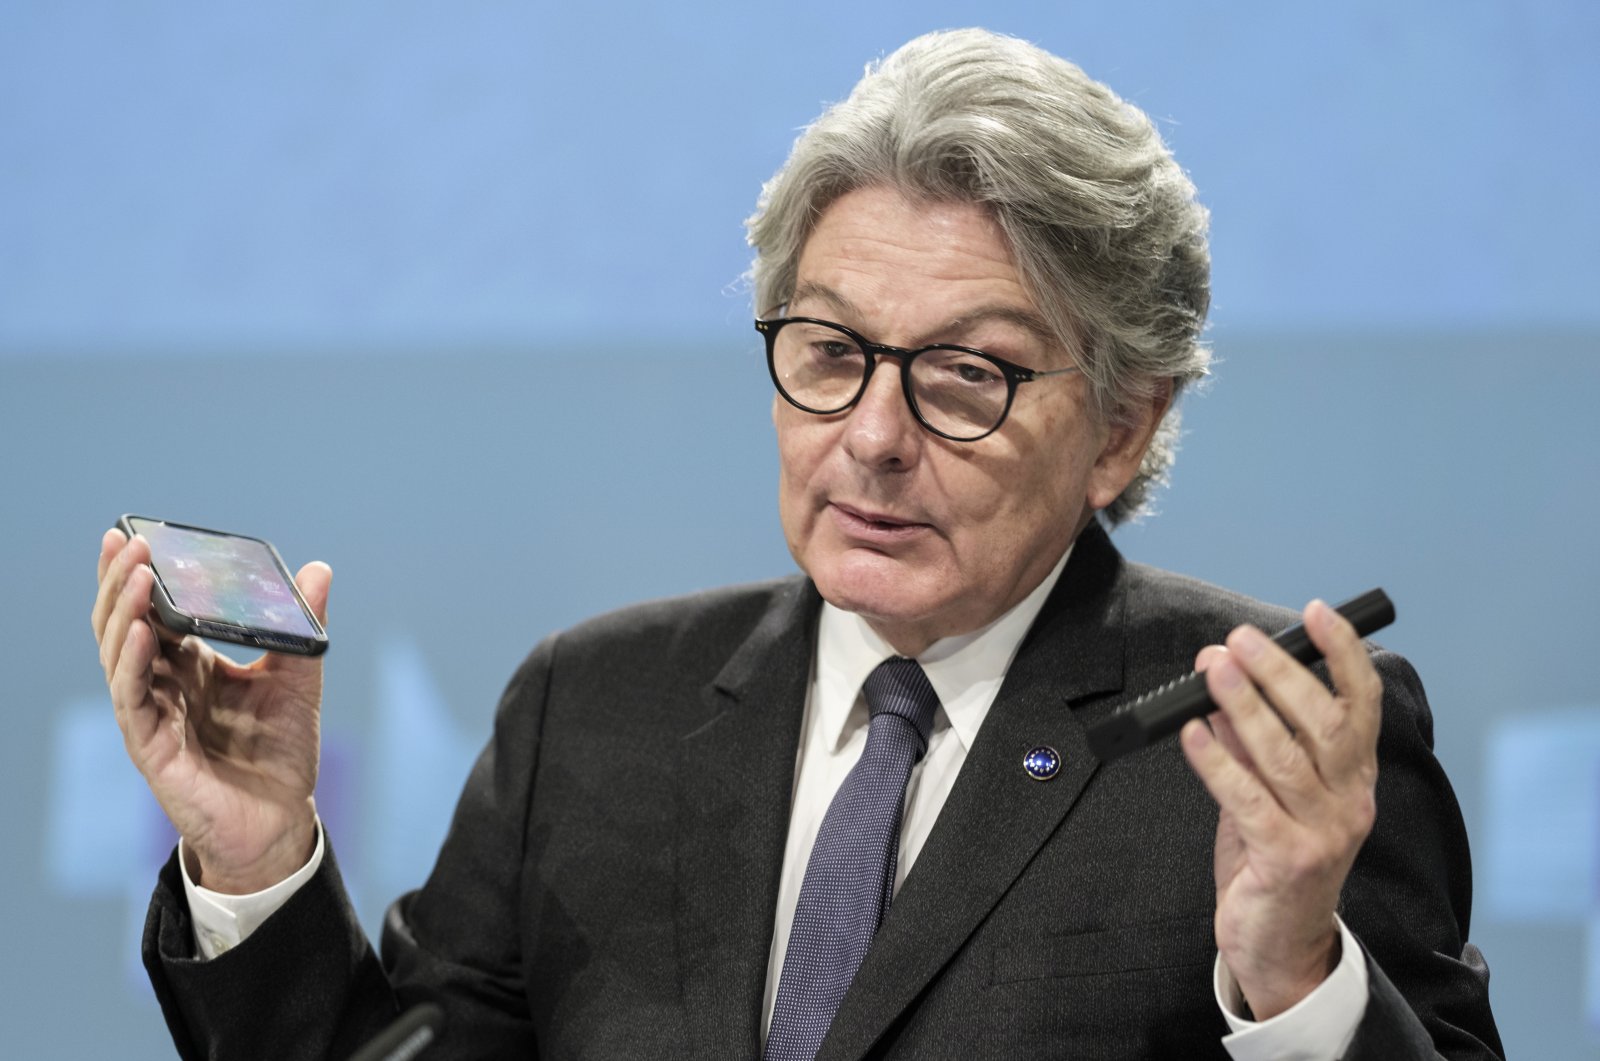 European Internal Market Commissioner Thierry Breton speaks during a media conference on a common charging solution for mobile phones at the EU headquarters in Brussels, Belgium, Sept. 23, 2021. (AP Photo)